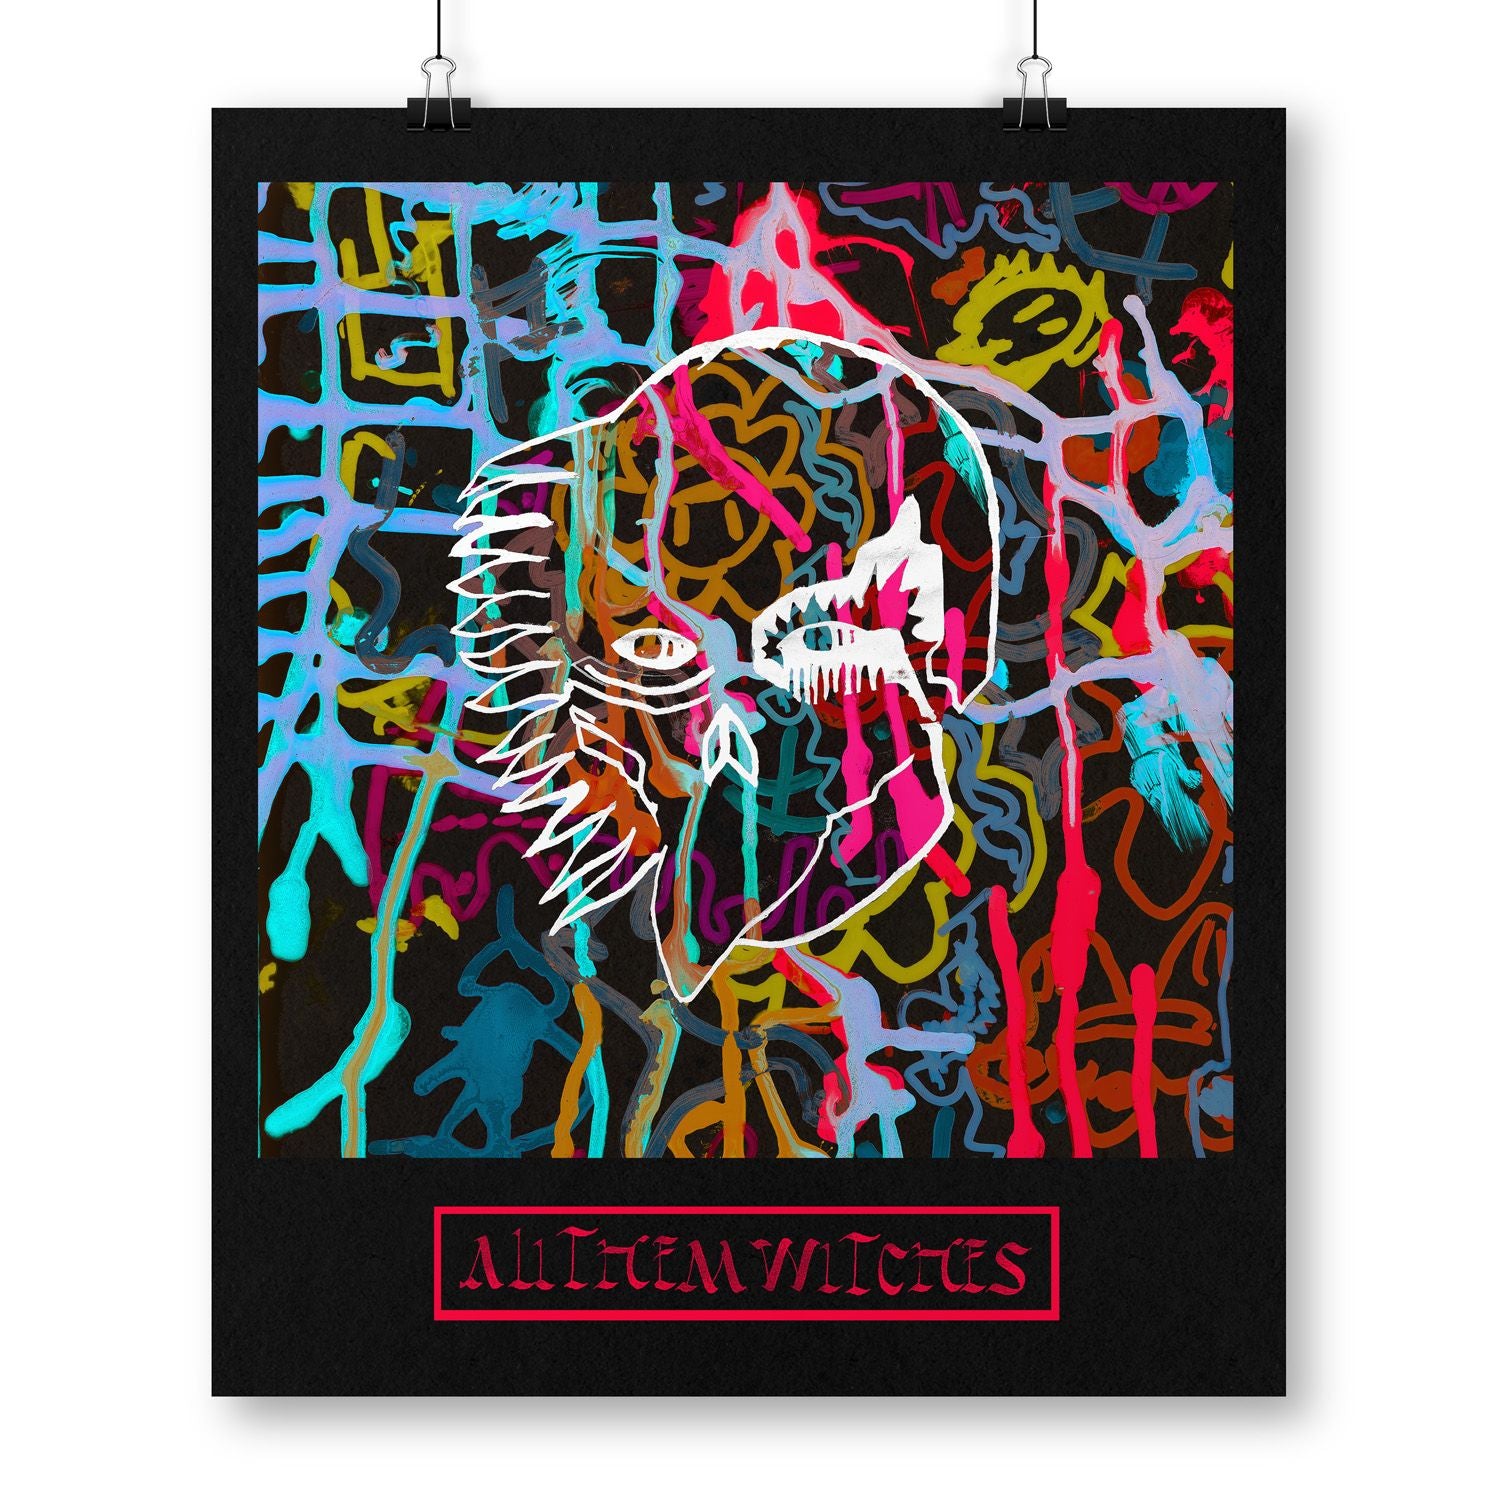 All Them Witches - Nothing as the Ideal [Blacklight Poster]